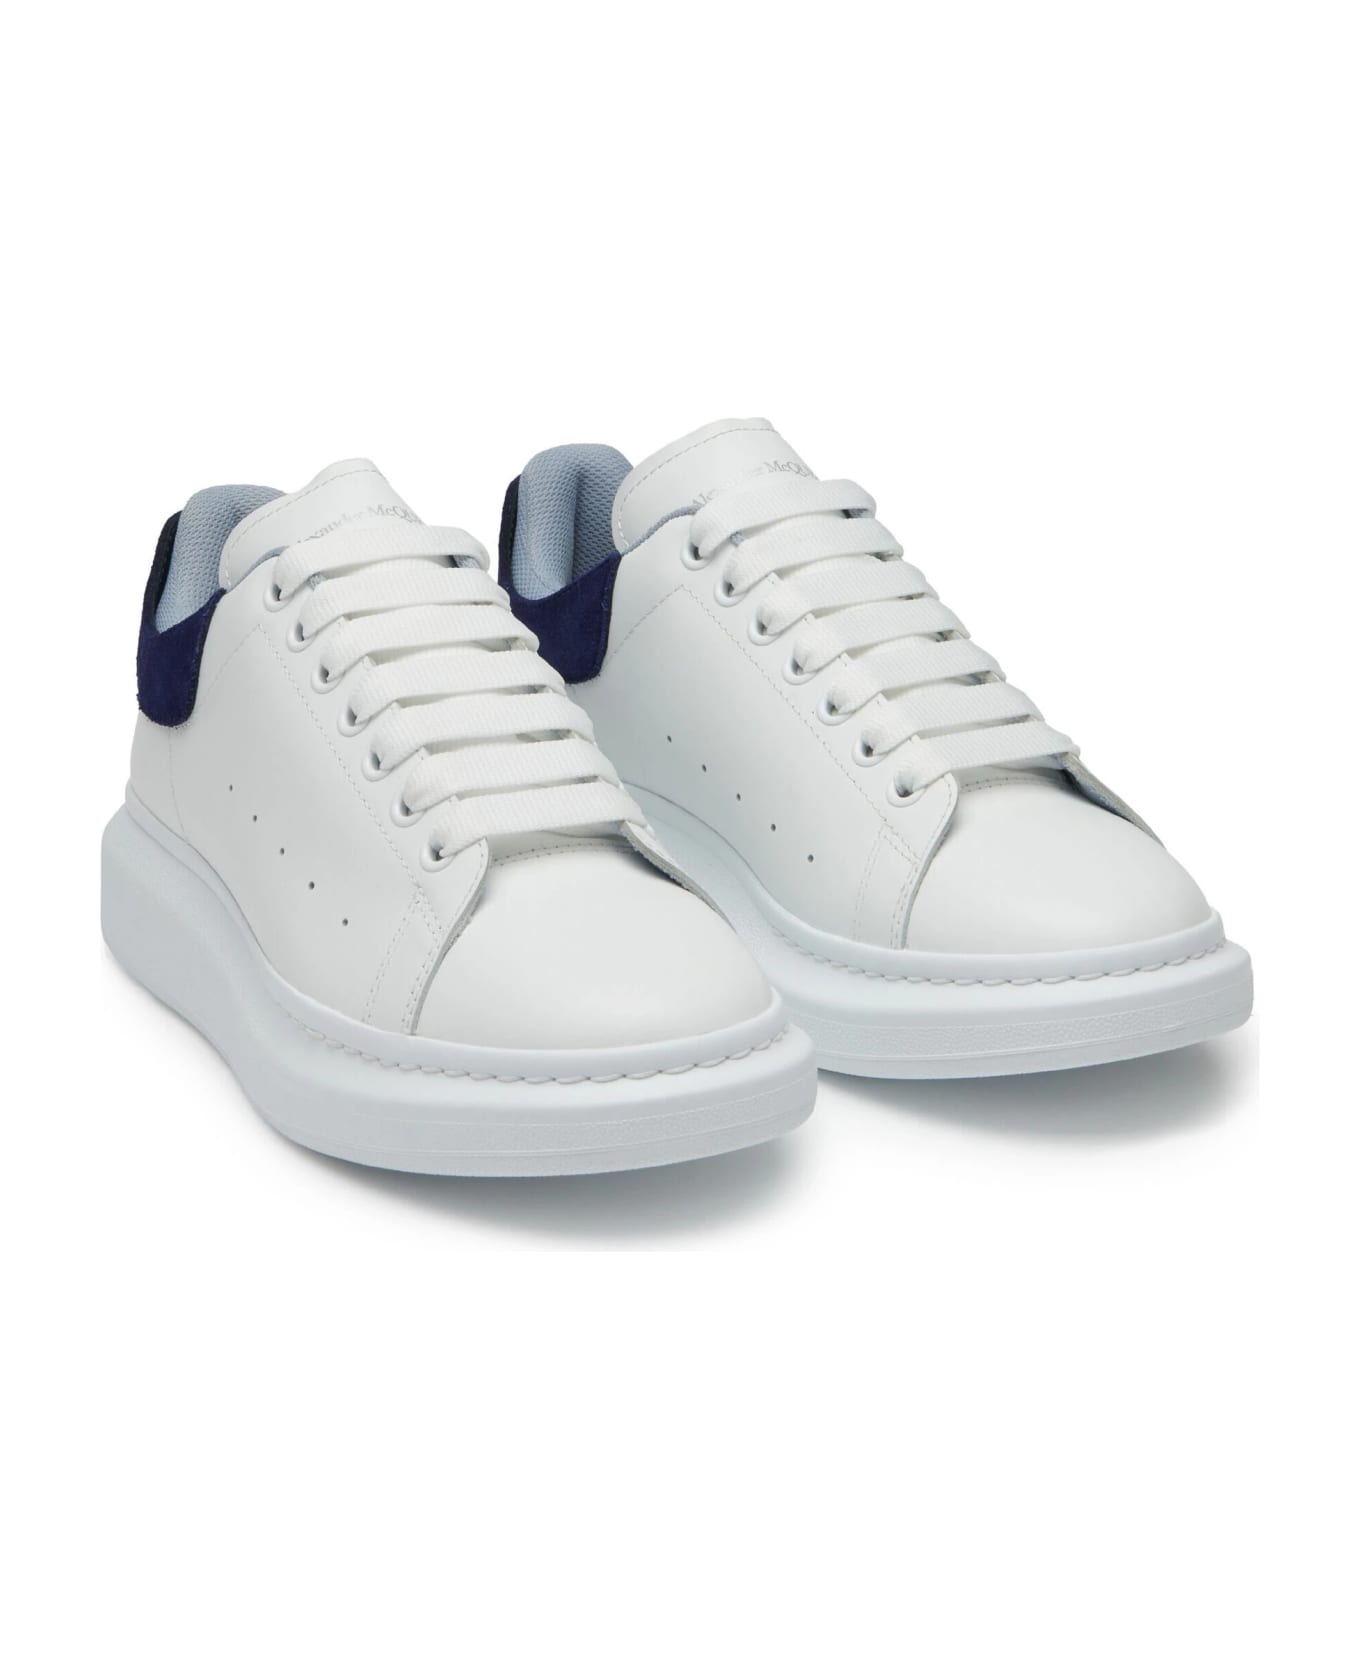 Alexander McQueen White Oversized Sneakers With Navy And Light Blue Details - White